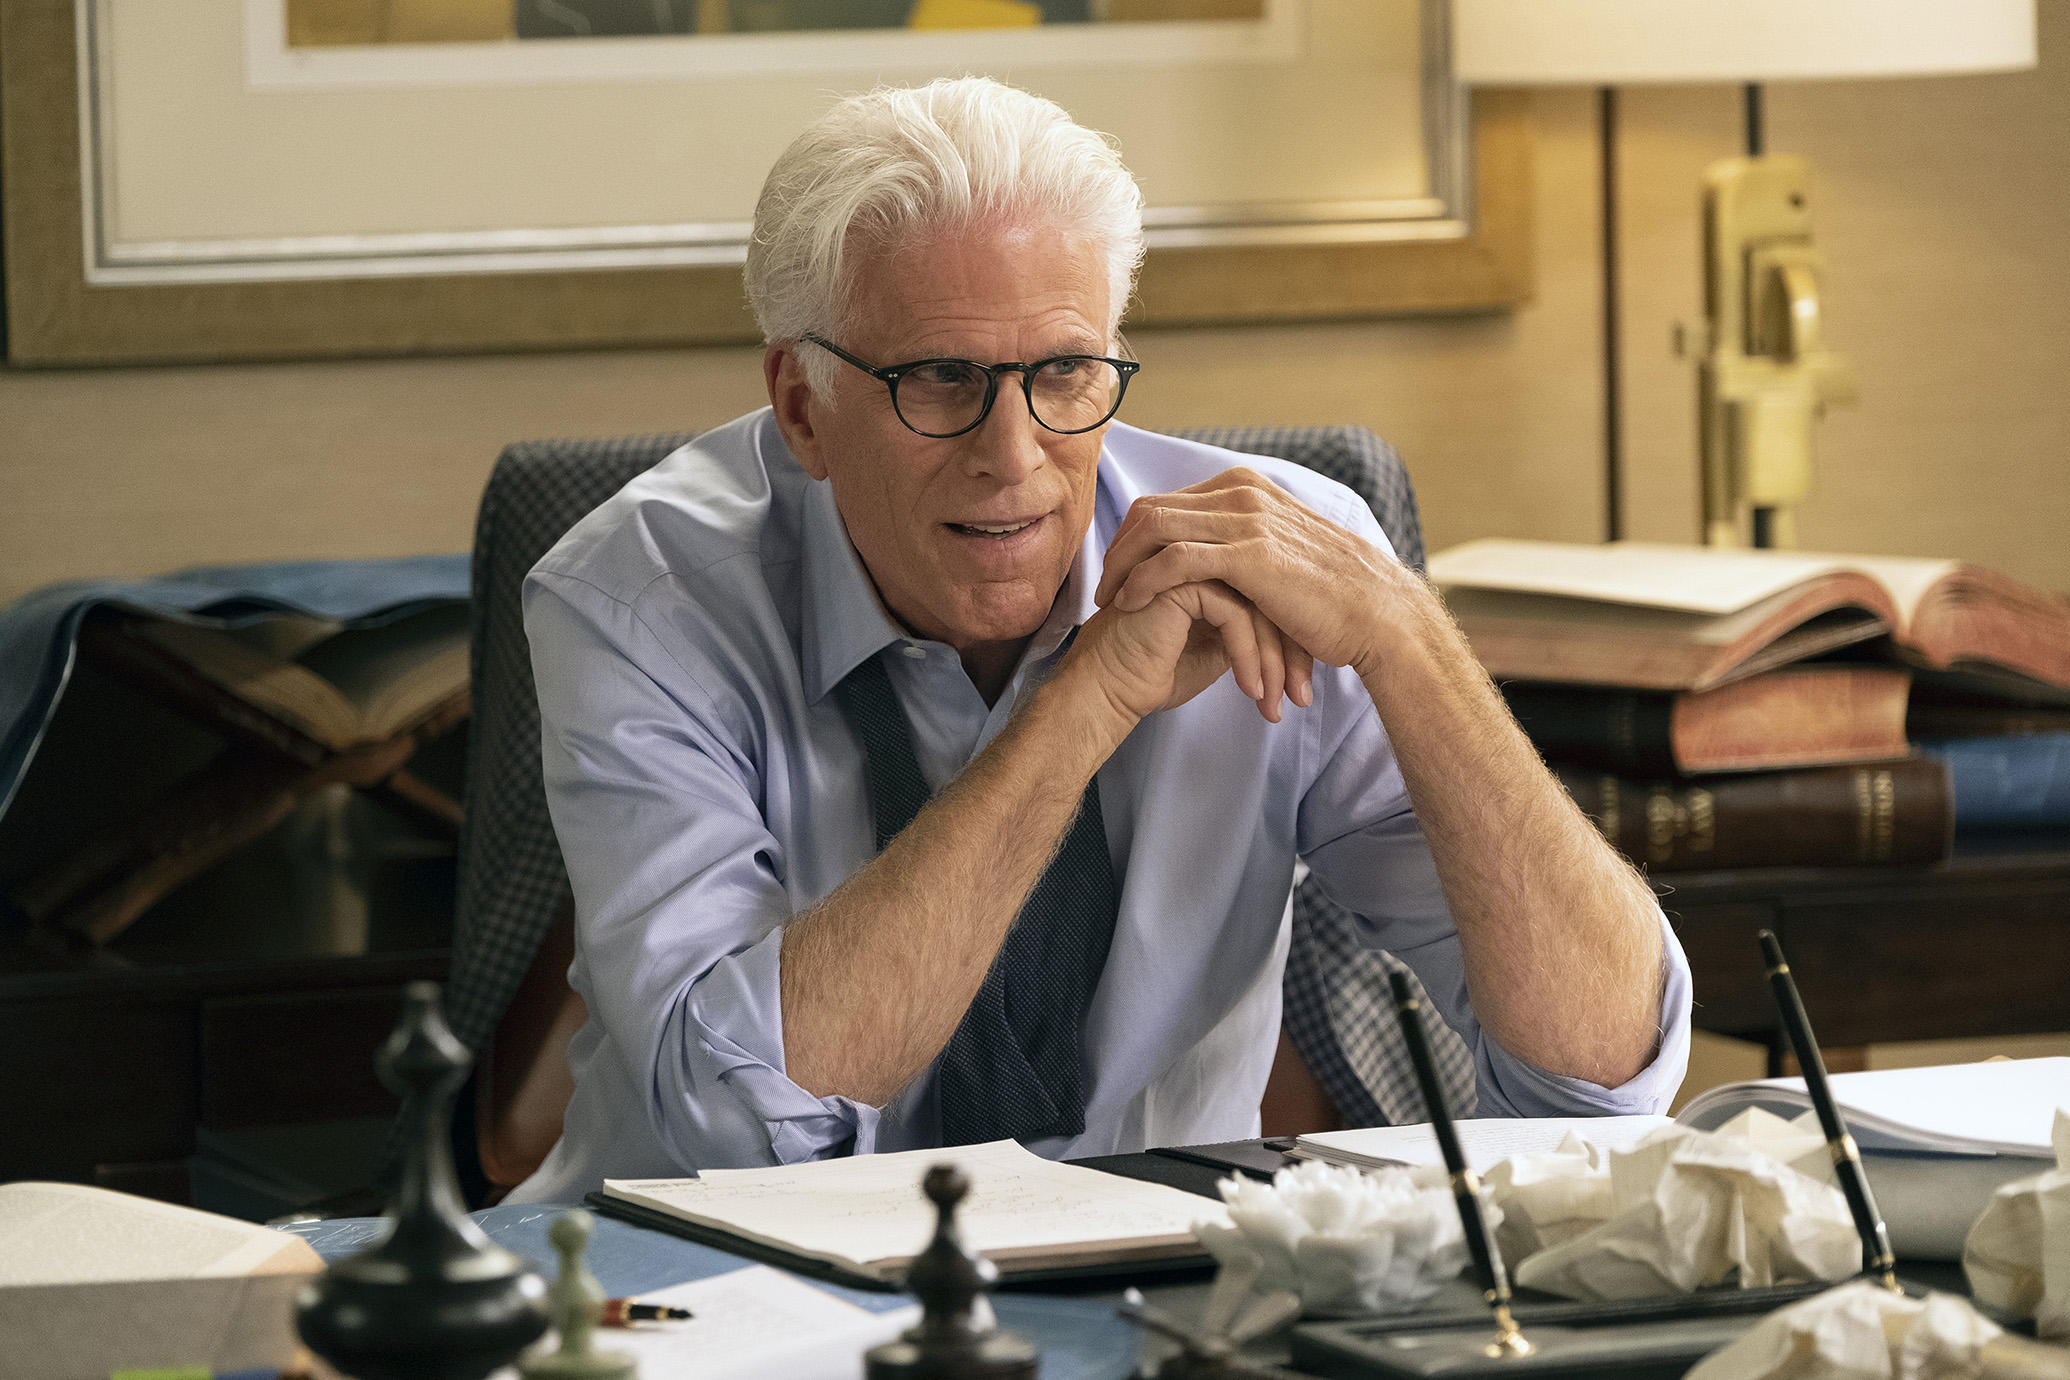 New Ted Danson/Tina Fey Series Was Originally A 30 Rock Spinoff With Alec Baldwin As Jack Donaghy